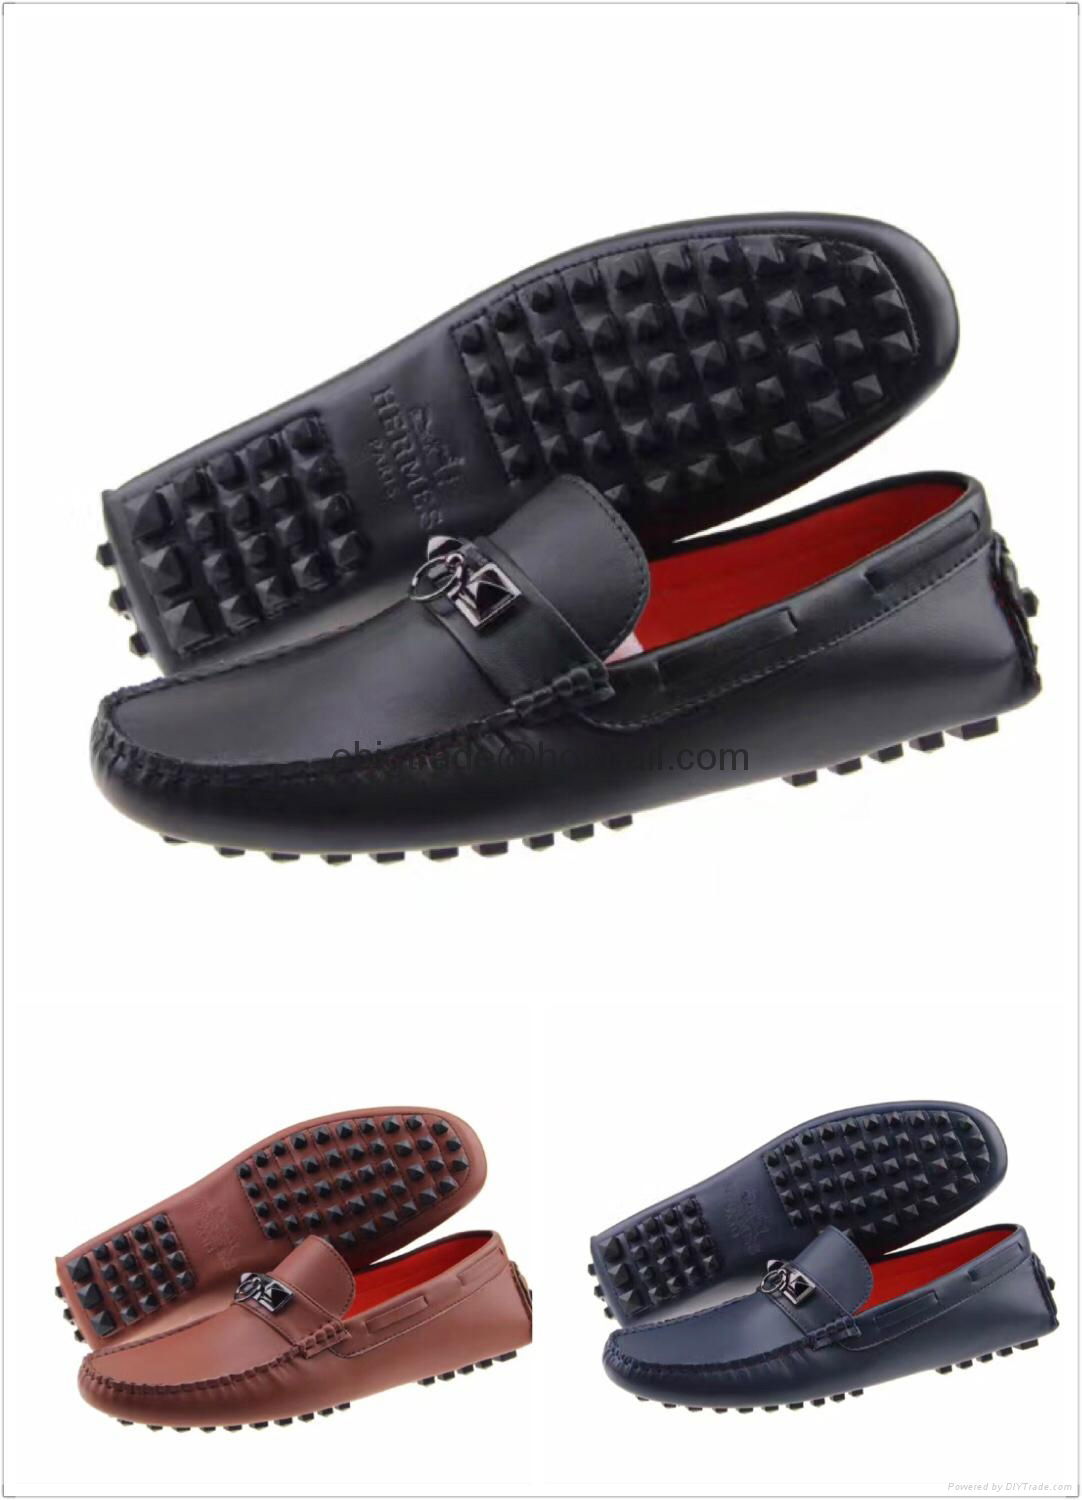 Cheap Hermes loafers for men Hermes shoes for men Hermes Driving shoes on sale (China Trading ...